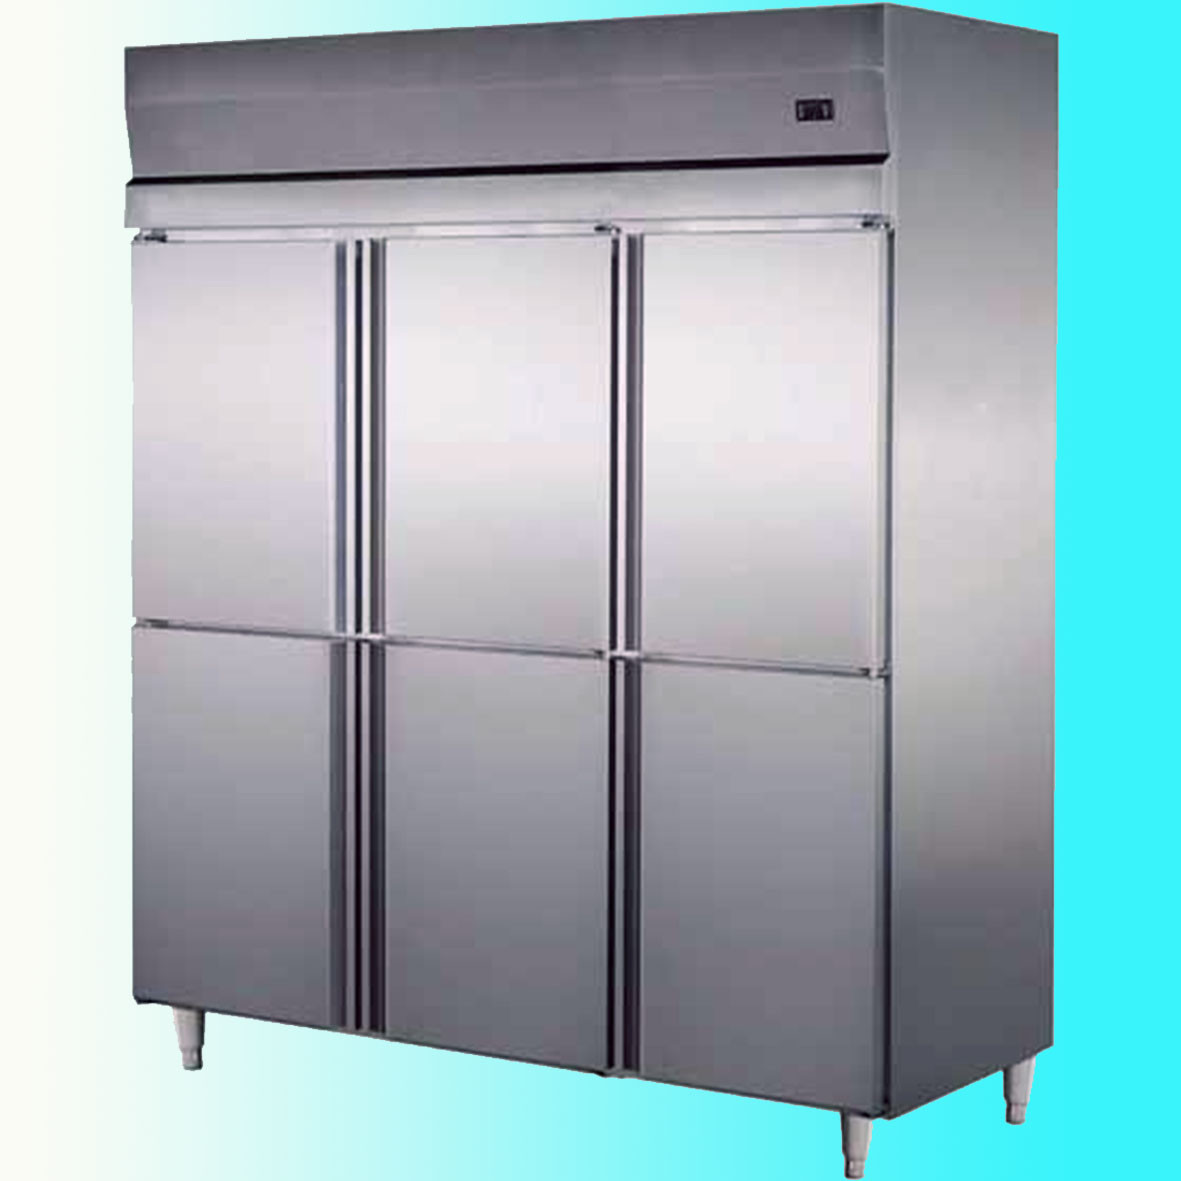 Portable Commercial Upright Freezerl Top Mounted Compressor Refrigerator